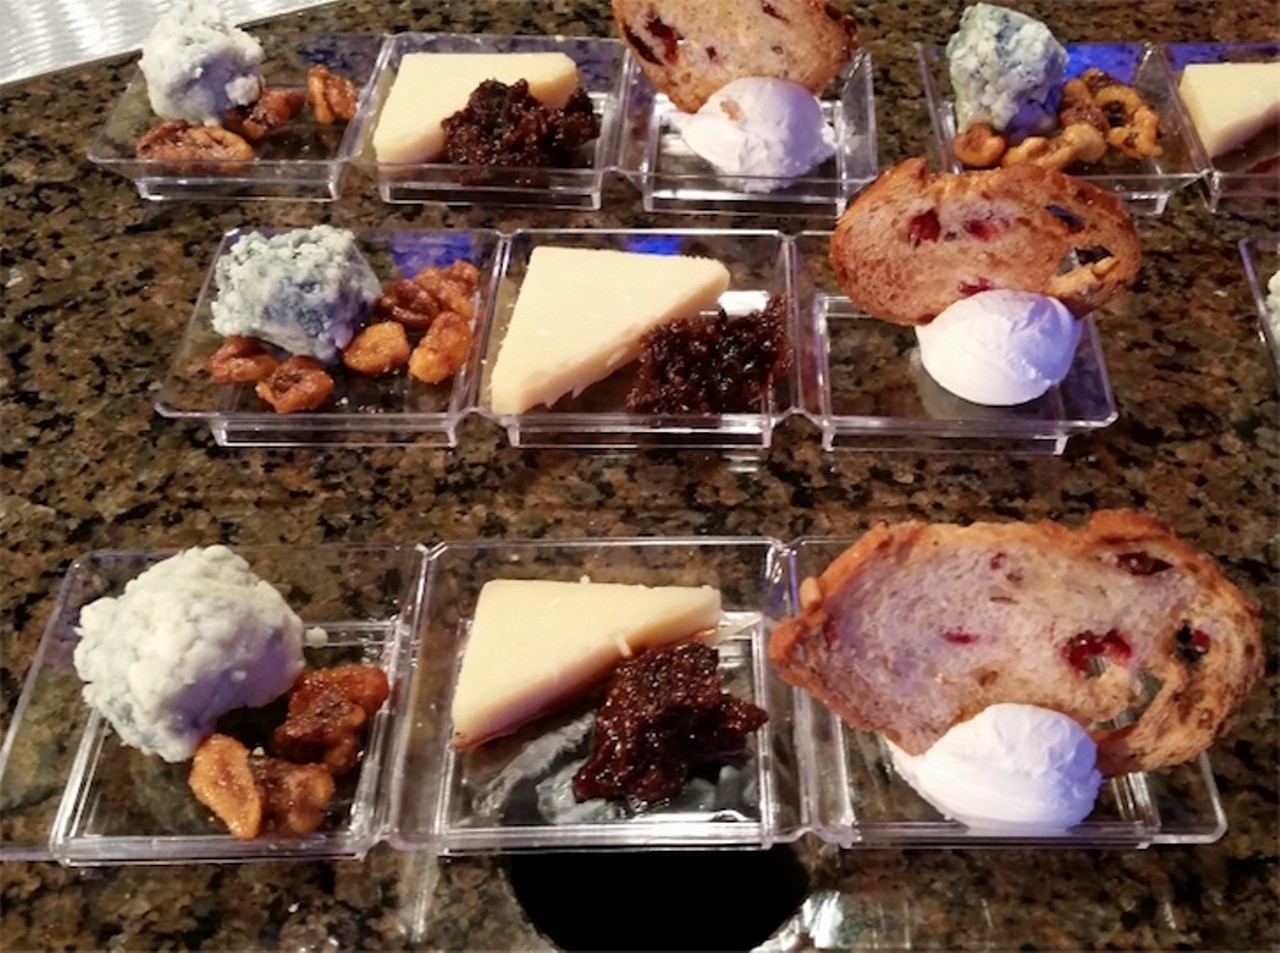 Trio of cheeses: La Bonne Vie goat cheese; Karst Cave-aged cheddar; Stateboro blue cheese